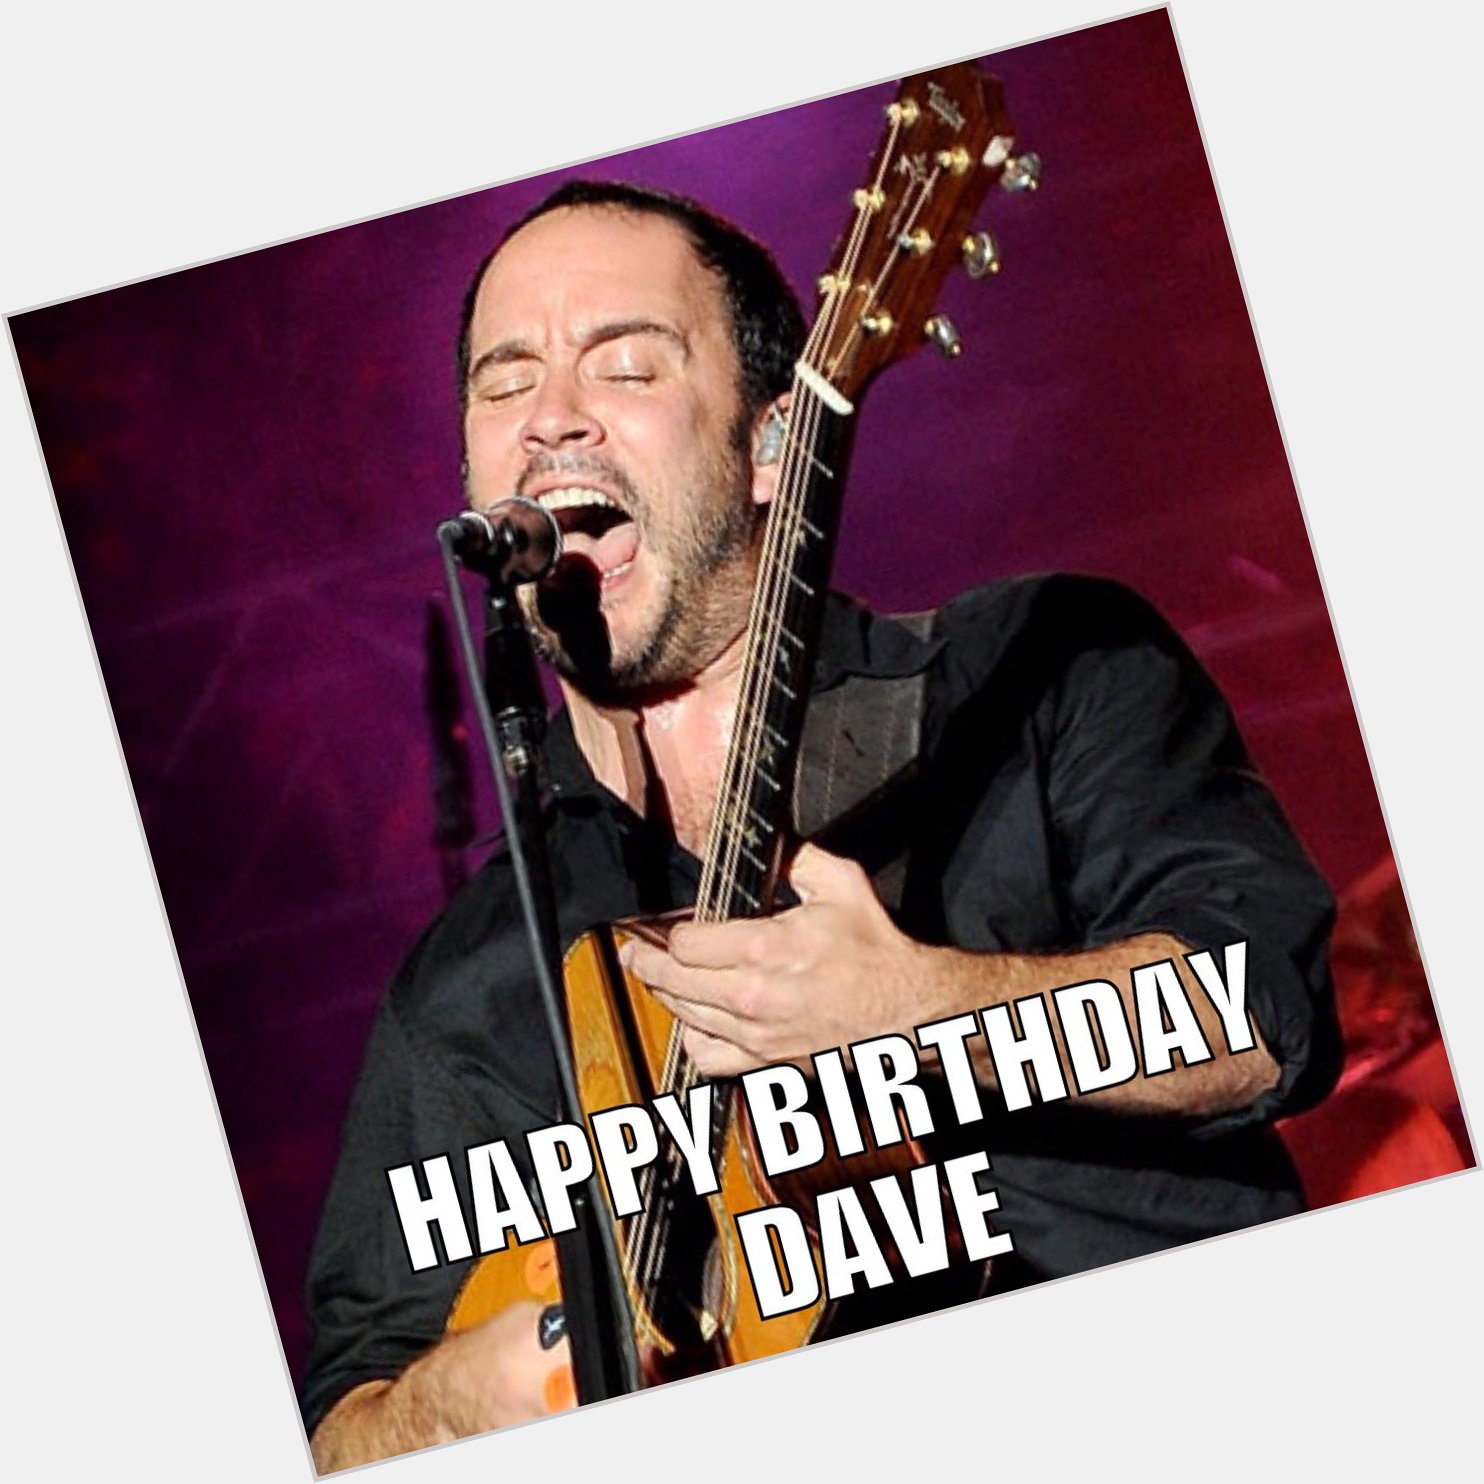 Happy birthday to Dave Matthews a most gifted musician thank you for sharing your gifts. 